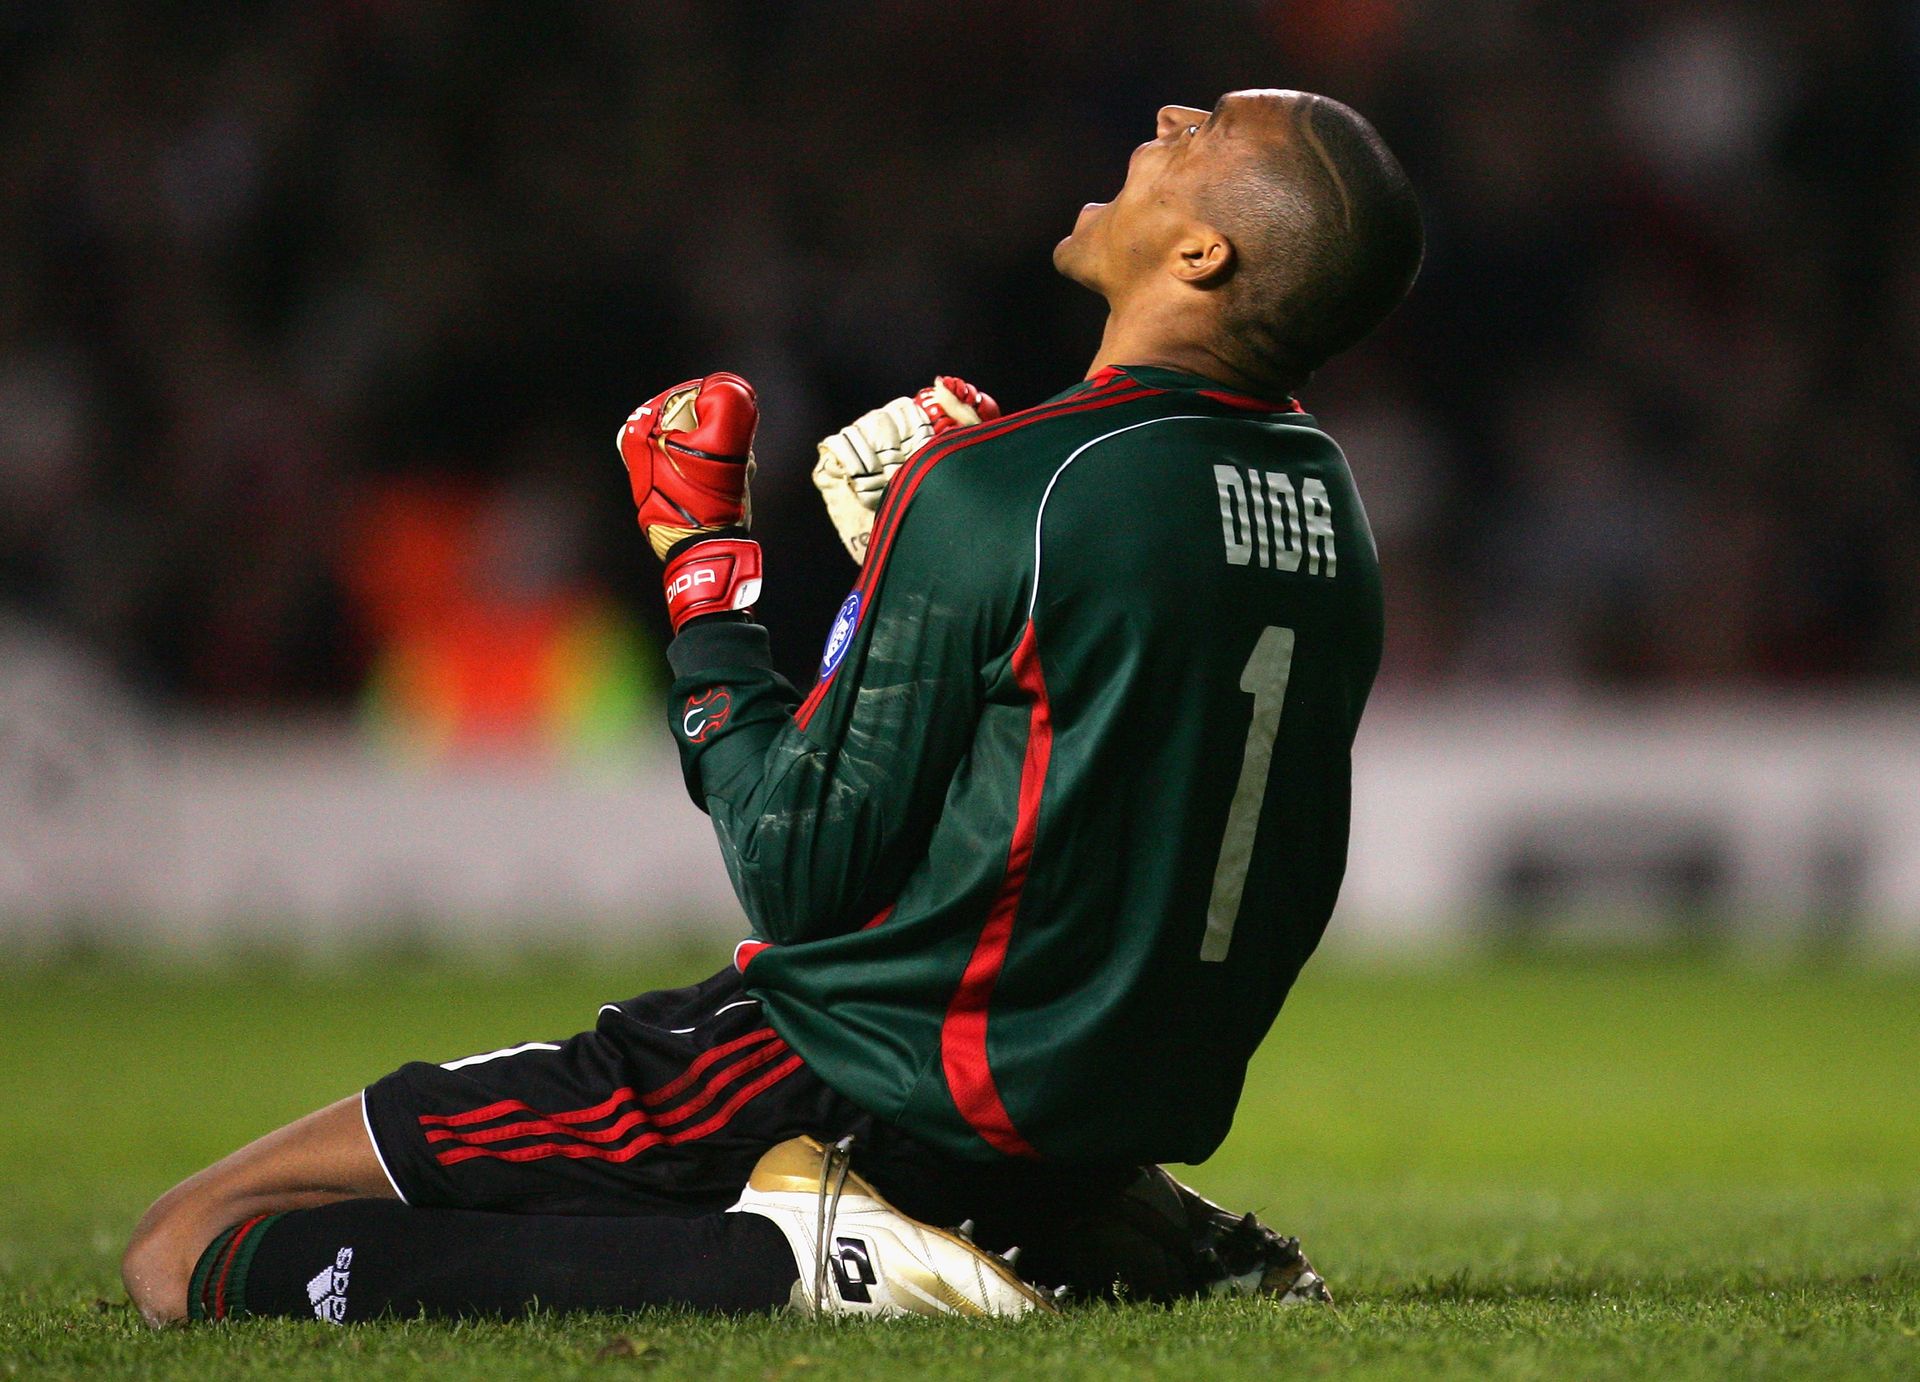 <p>                     Dida was AC Milan's goalkeeper through most of the 2000s and was part of two Champions League-winning teams for the Rossoneri in 2003 and 2007.                   </p>                                      <p>                     Named second best goalkeeper in the world by IFFHS in 2005 and third best in 2004, Dida won 91 caps for Brazil and was a World Cup winner in 2002, although he did not play a single minute in Japan and South Korea.                   </p>